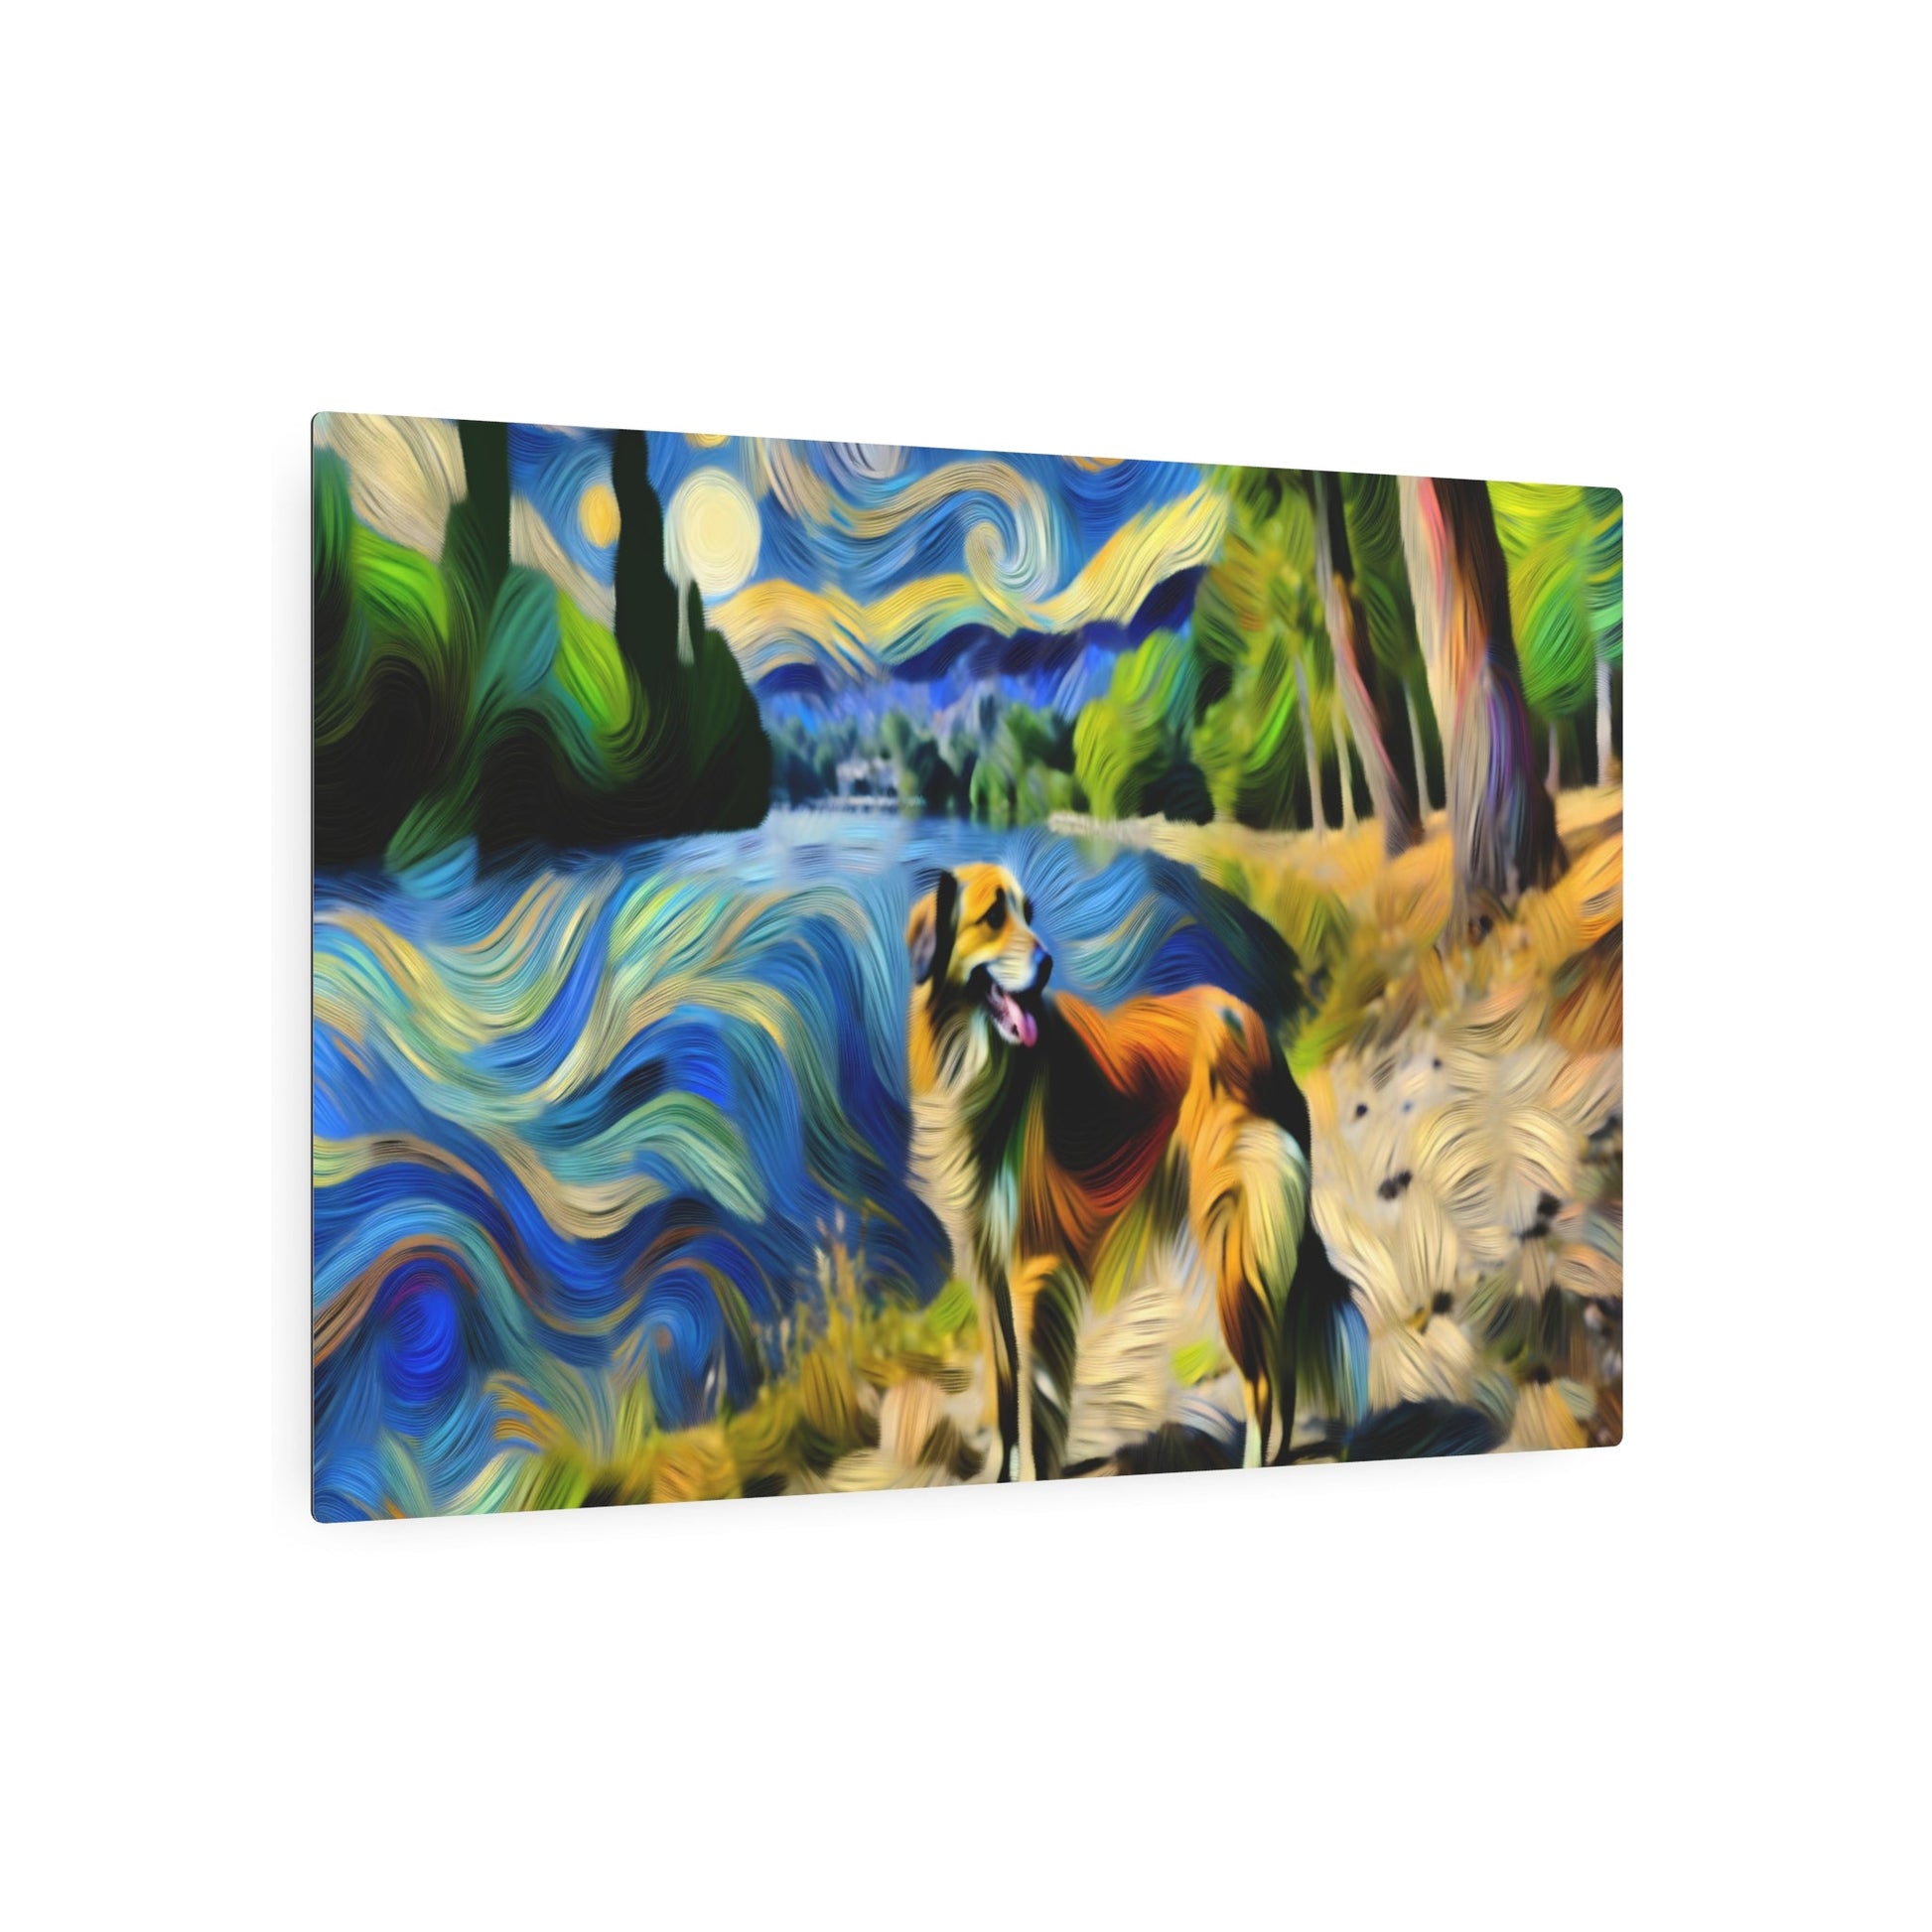 Metal Poster Art | "Post-Impressionism Art Print - Vibrant Western Art Style Featuring a Loyal Dog by a Picturesque River, Expressing Artist's Subject - Metal Poster Art 36″ x 24″ (Horizontal) 0.12''